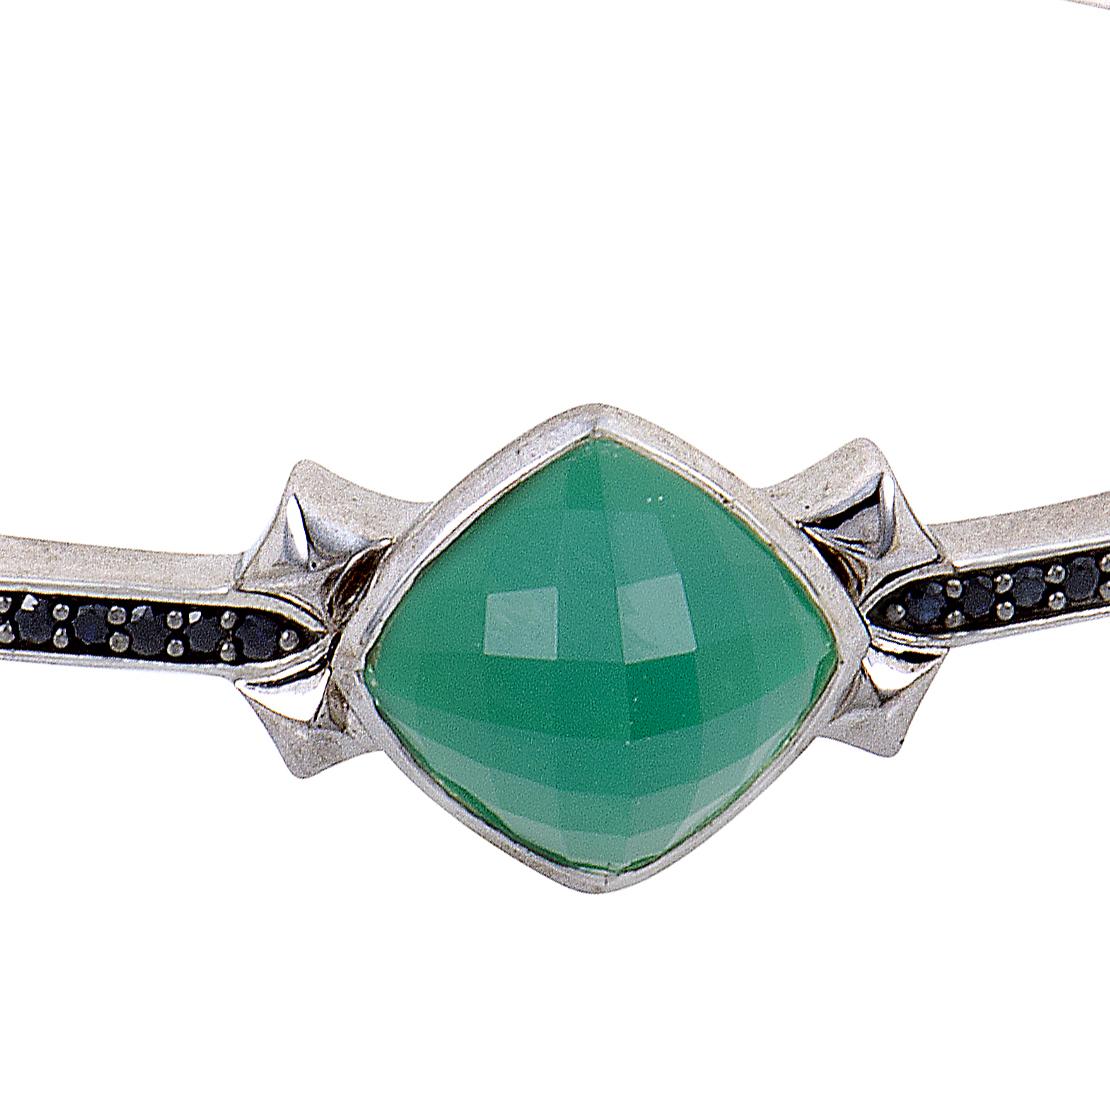 Lined along the slim shape of splendid white rhodium-plated silver, the exquisitely set black spinels totaling 0.27ct lead the eye up to the marvelous synthesized chrysoprase and quartz in this exceptional bangle from Stephen Webster's Superstud